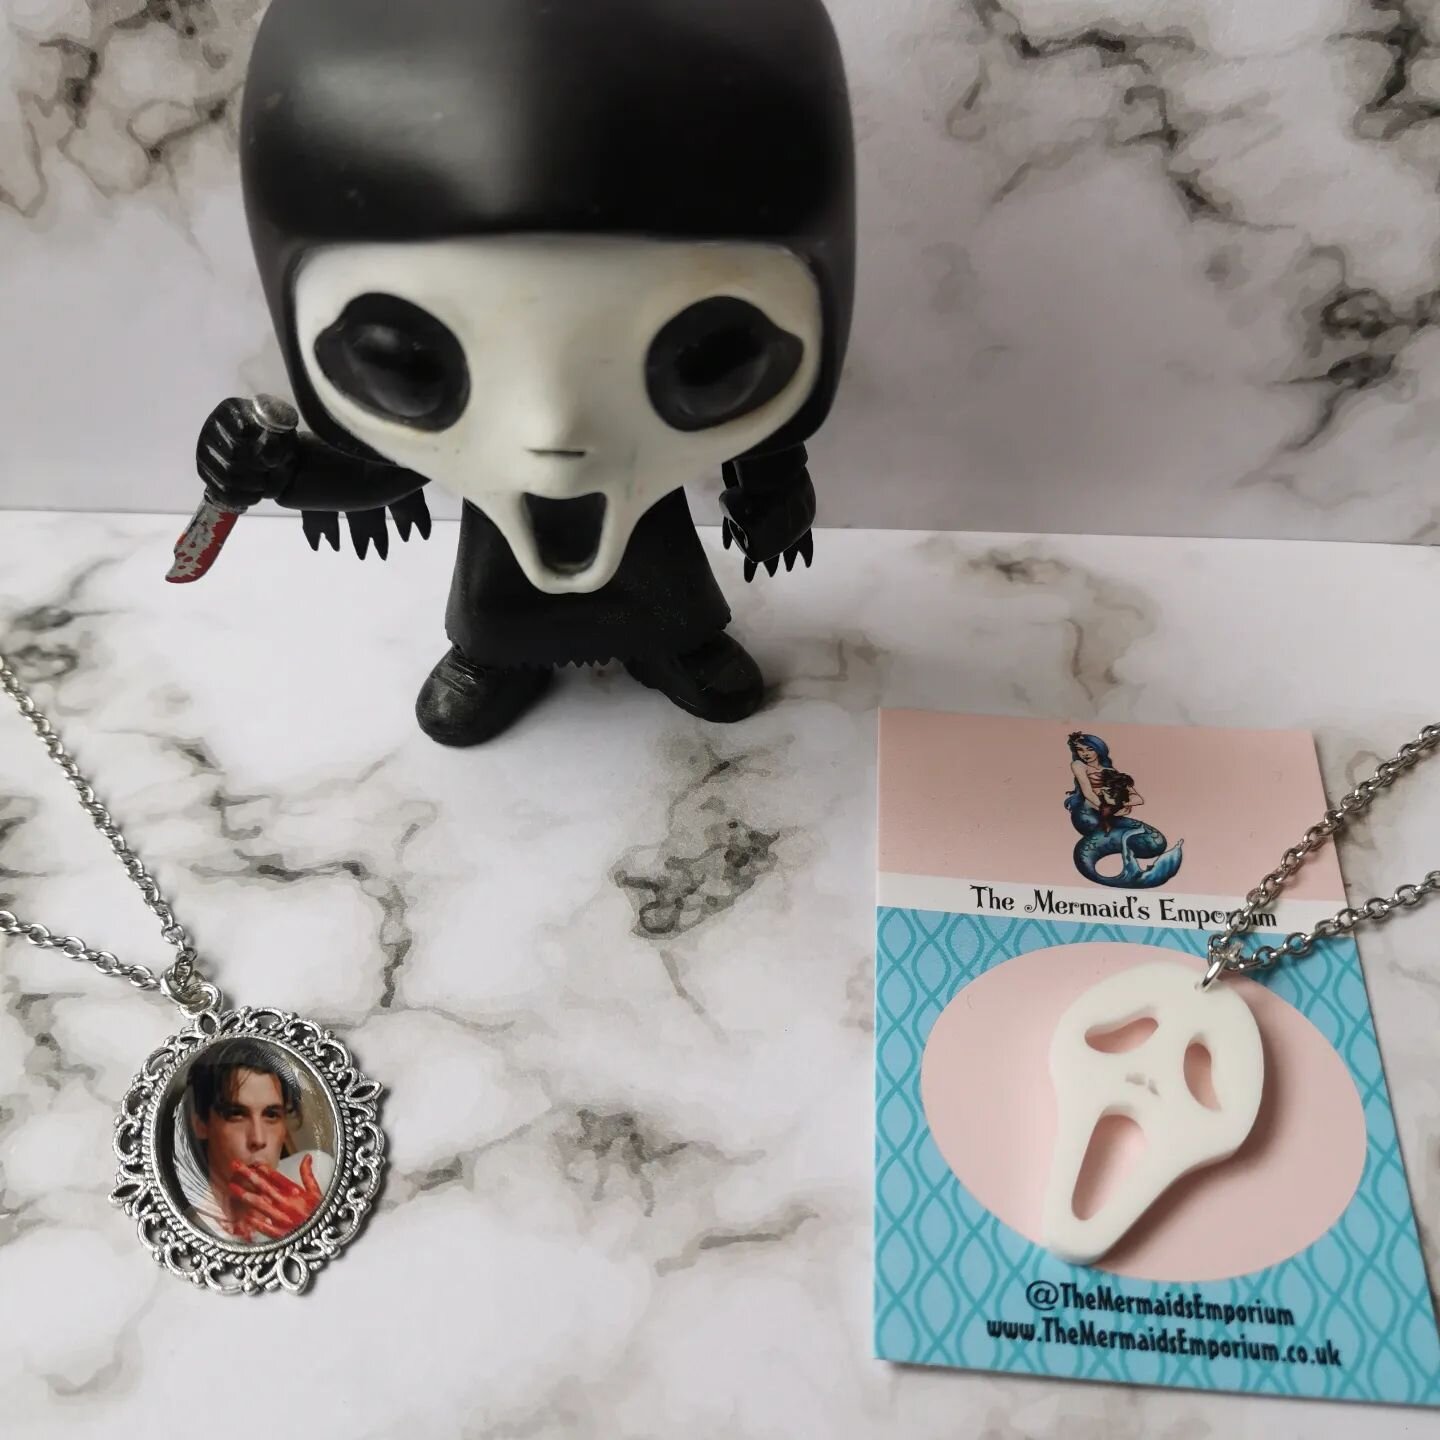 Both our scream necklaces are available atm!!
..
.
#scream #screammovie #scream2 #scream2022 #screamedit #scream1996 #horror #billyloomis #skeetulrich #horrormovies #horrorfilm #horrorcollector #horrorbabe #horrorjunkie #horroredit #horrorjewellery #